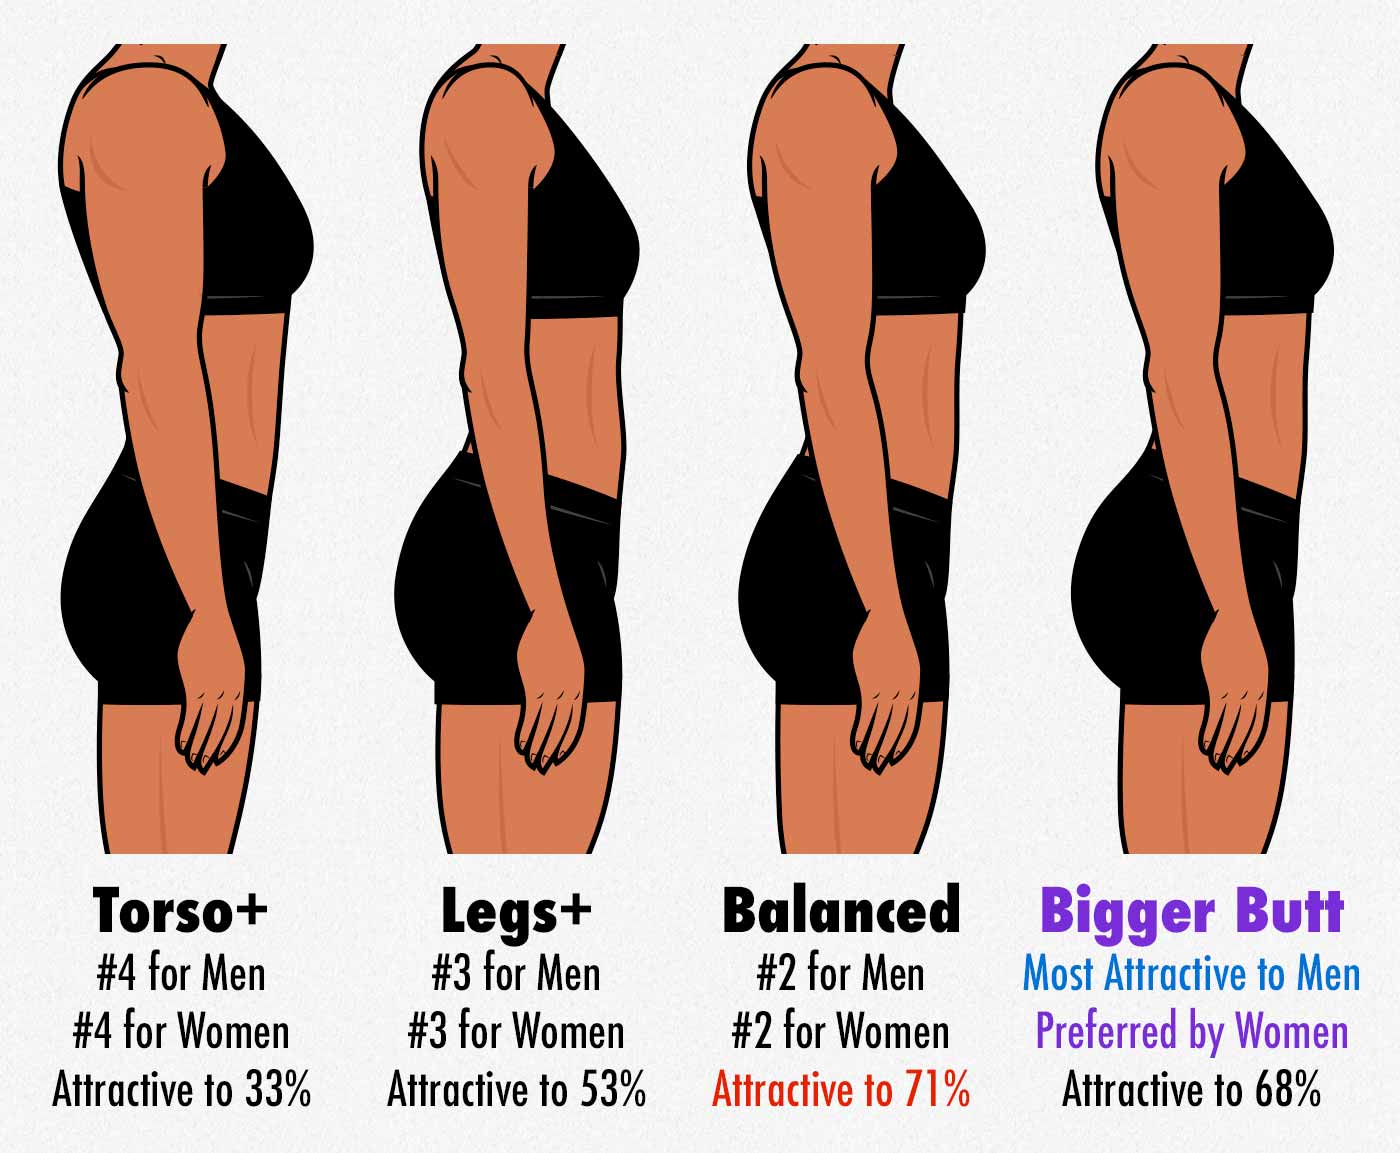 Survey results showing that men prefer women who are strong everywhere but have bigger glutes/butts.